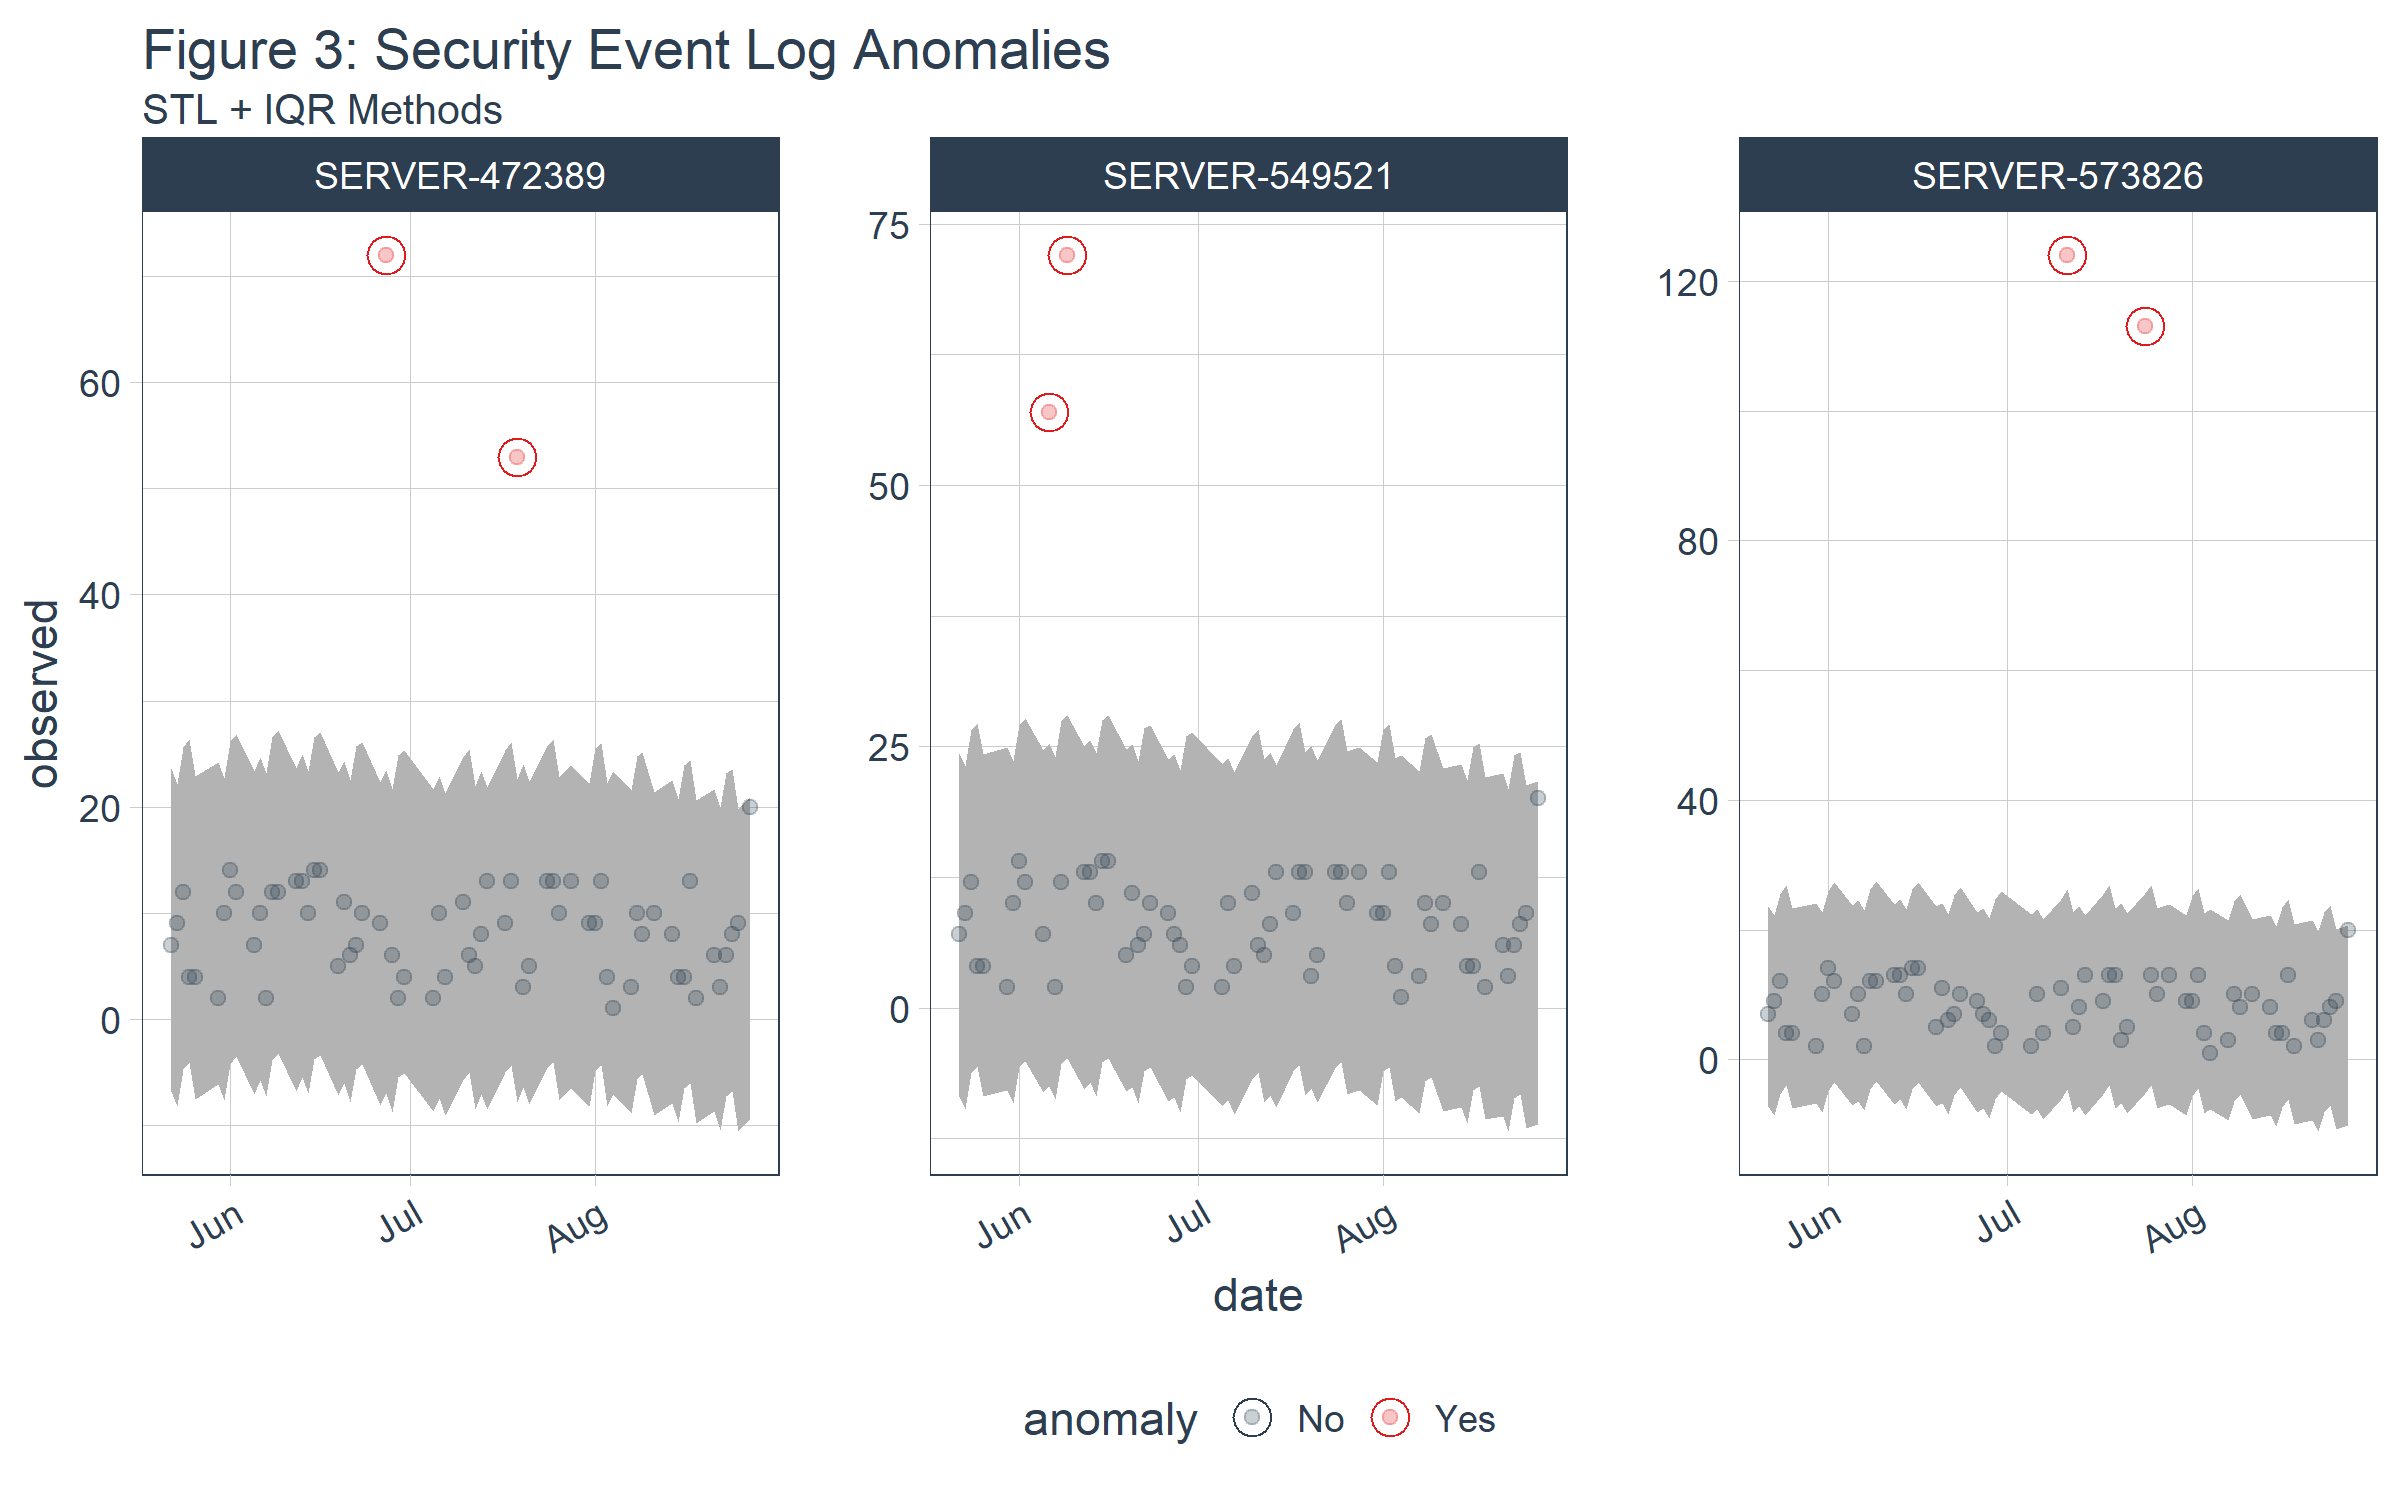 Security Event Log Anomalies